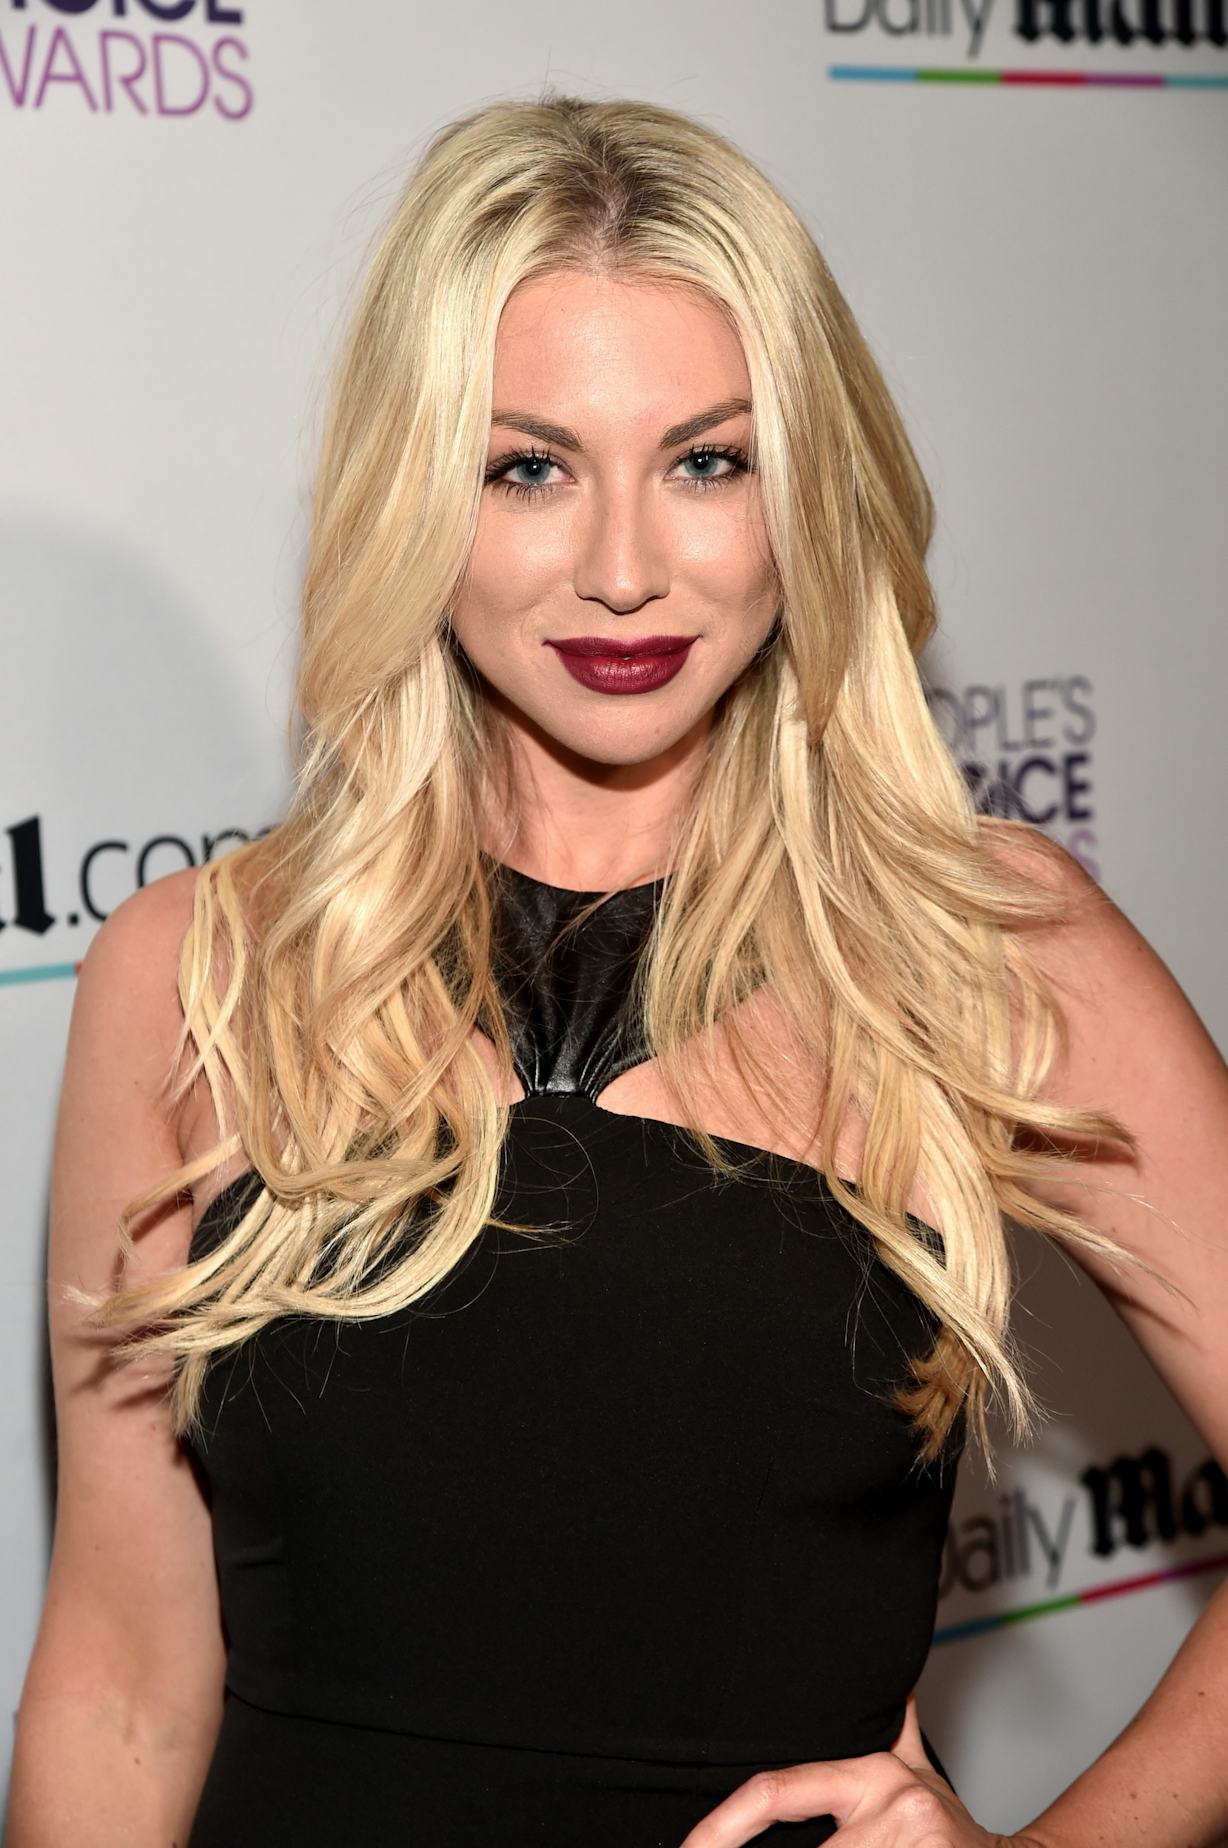 Stassi Schroeder Returns To 'Vanderpump Rules,' But Promises This Time